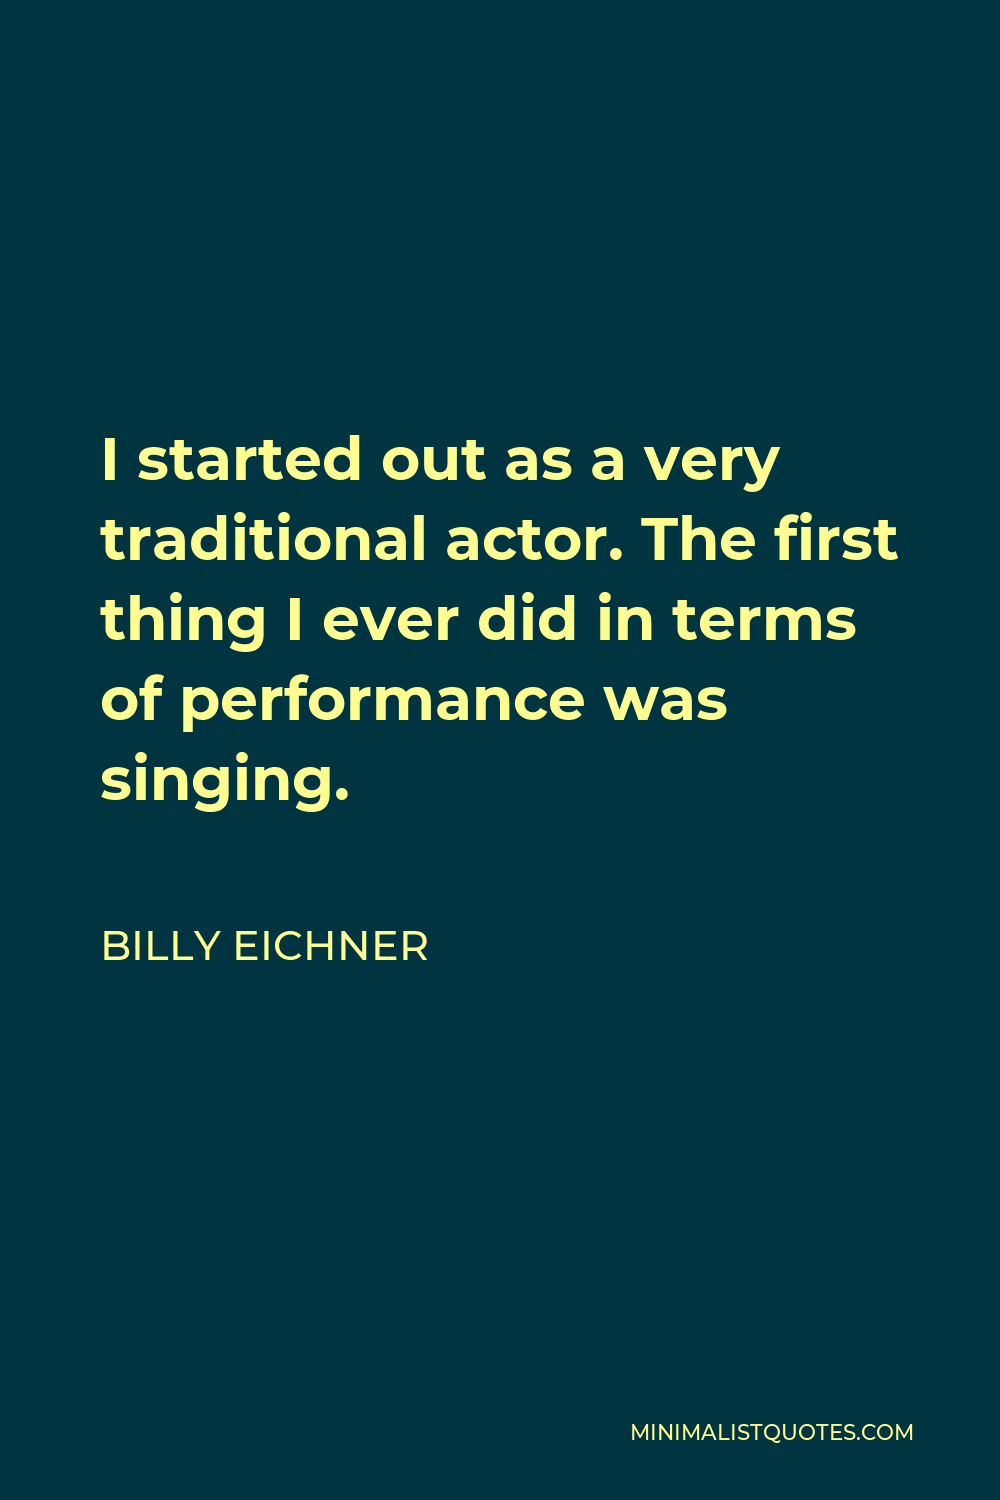 Billy Eichner Quote - I started out as a very traditional actor. The first thing I ever did in terms of performance was singing.